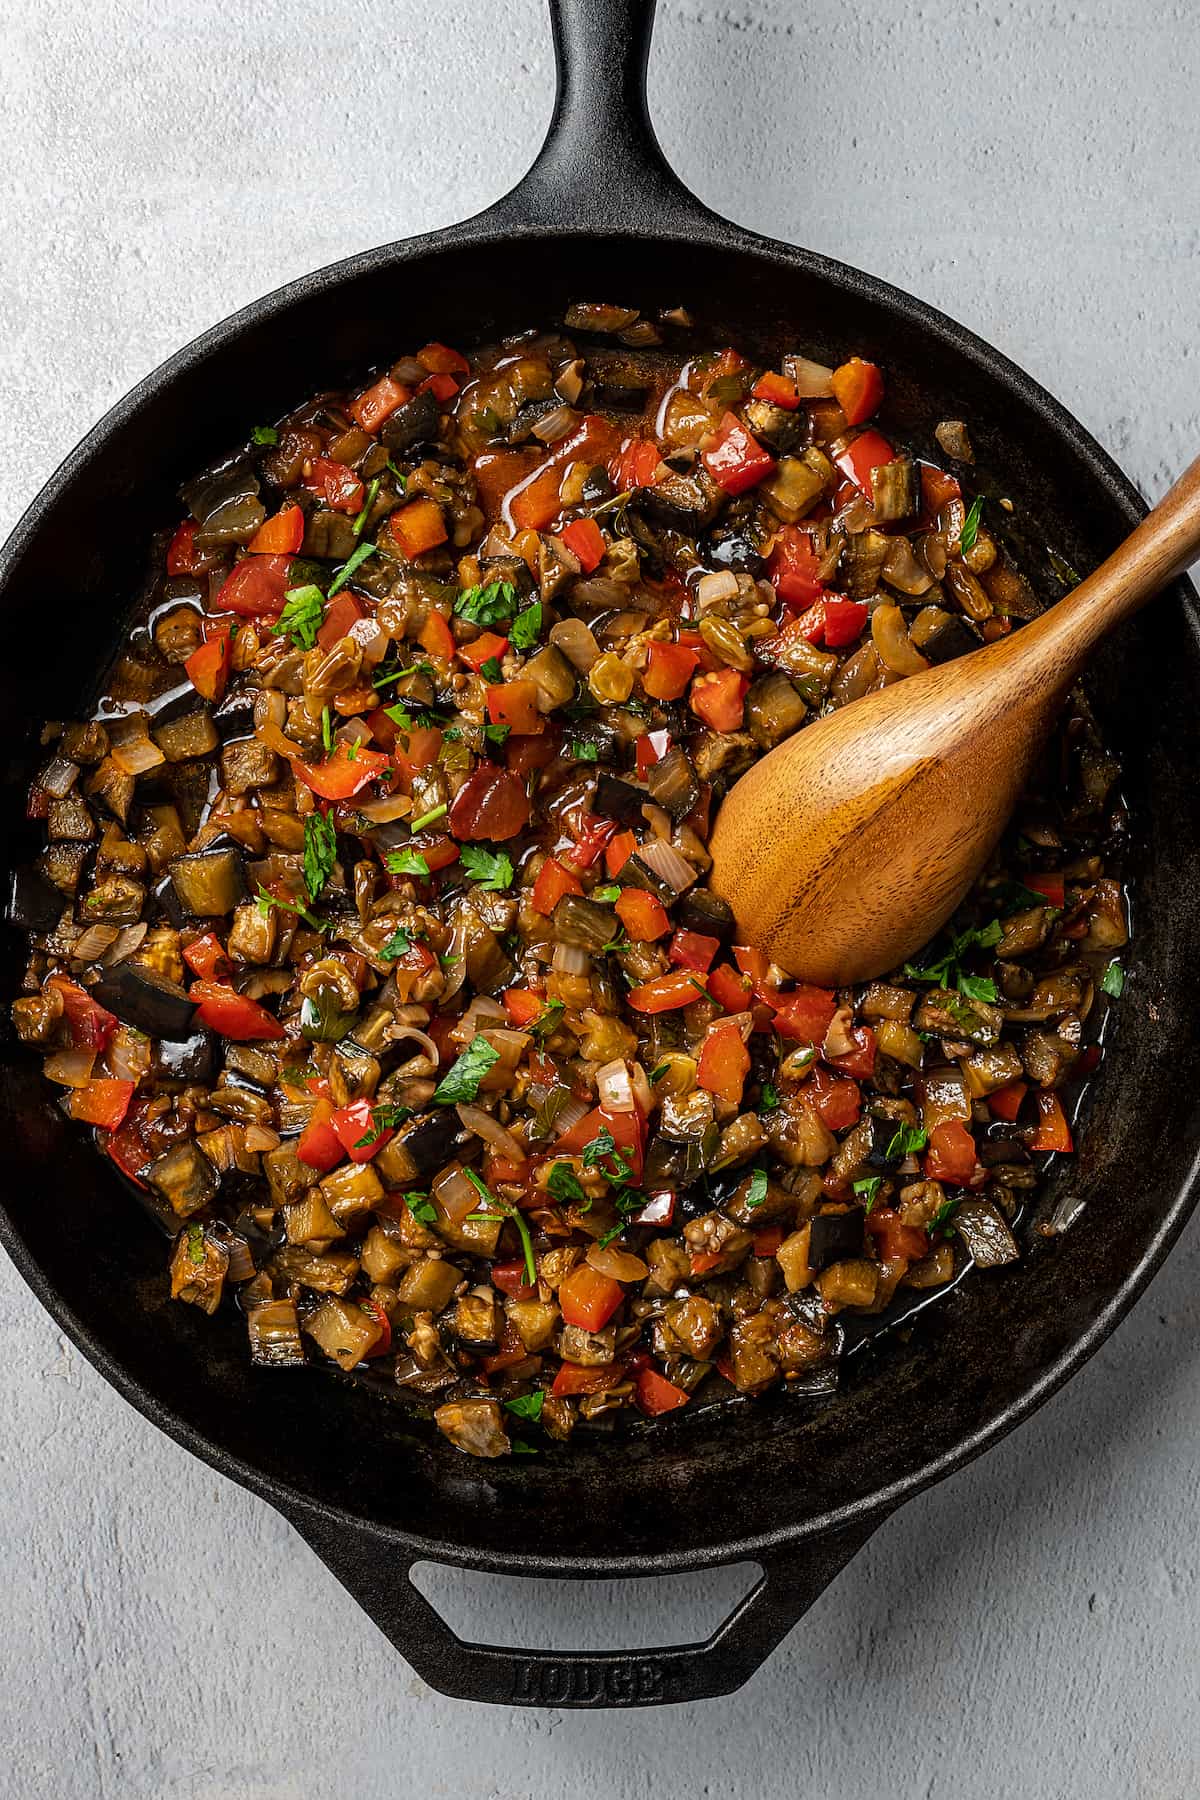 Caponata cooking in a cast-iron skillet.